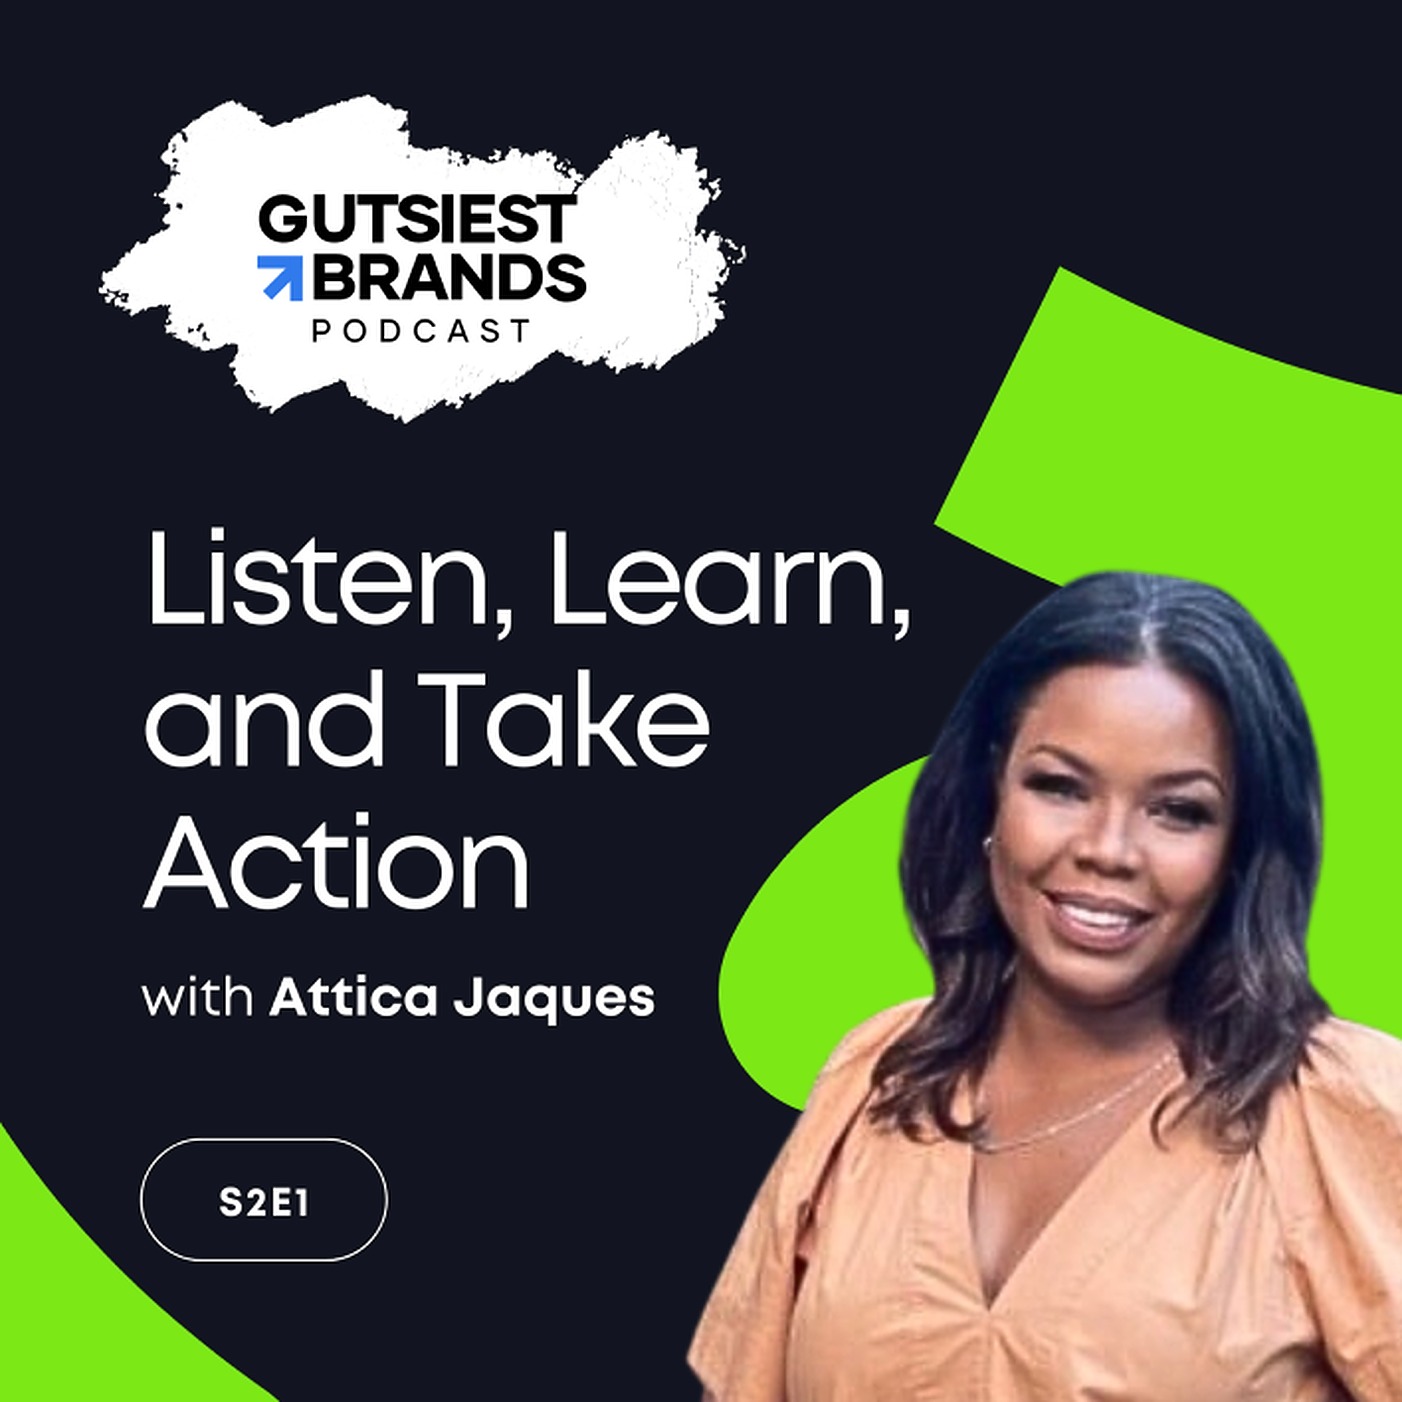 Listen, Learn, and Take Action with Attica Jaques